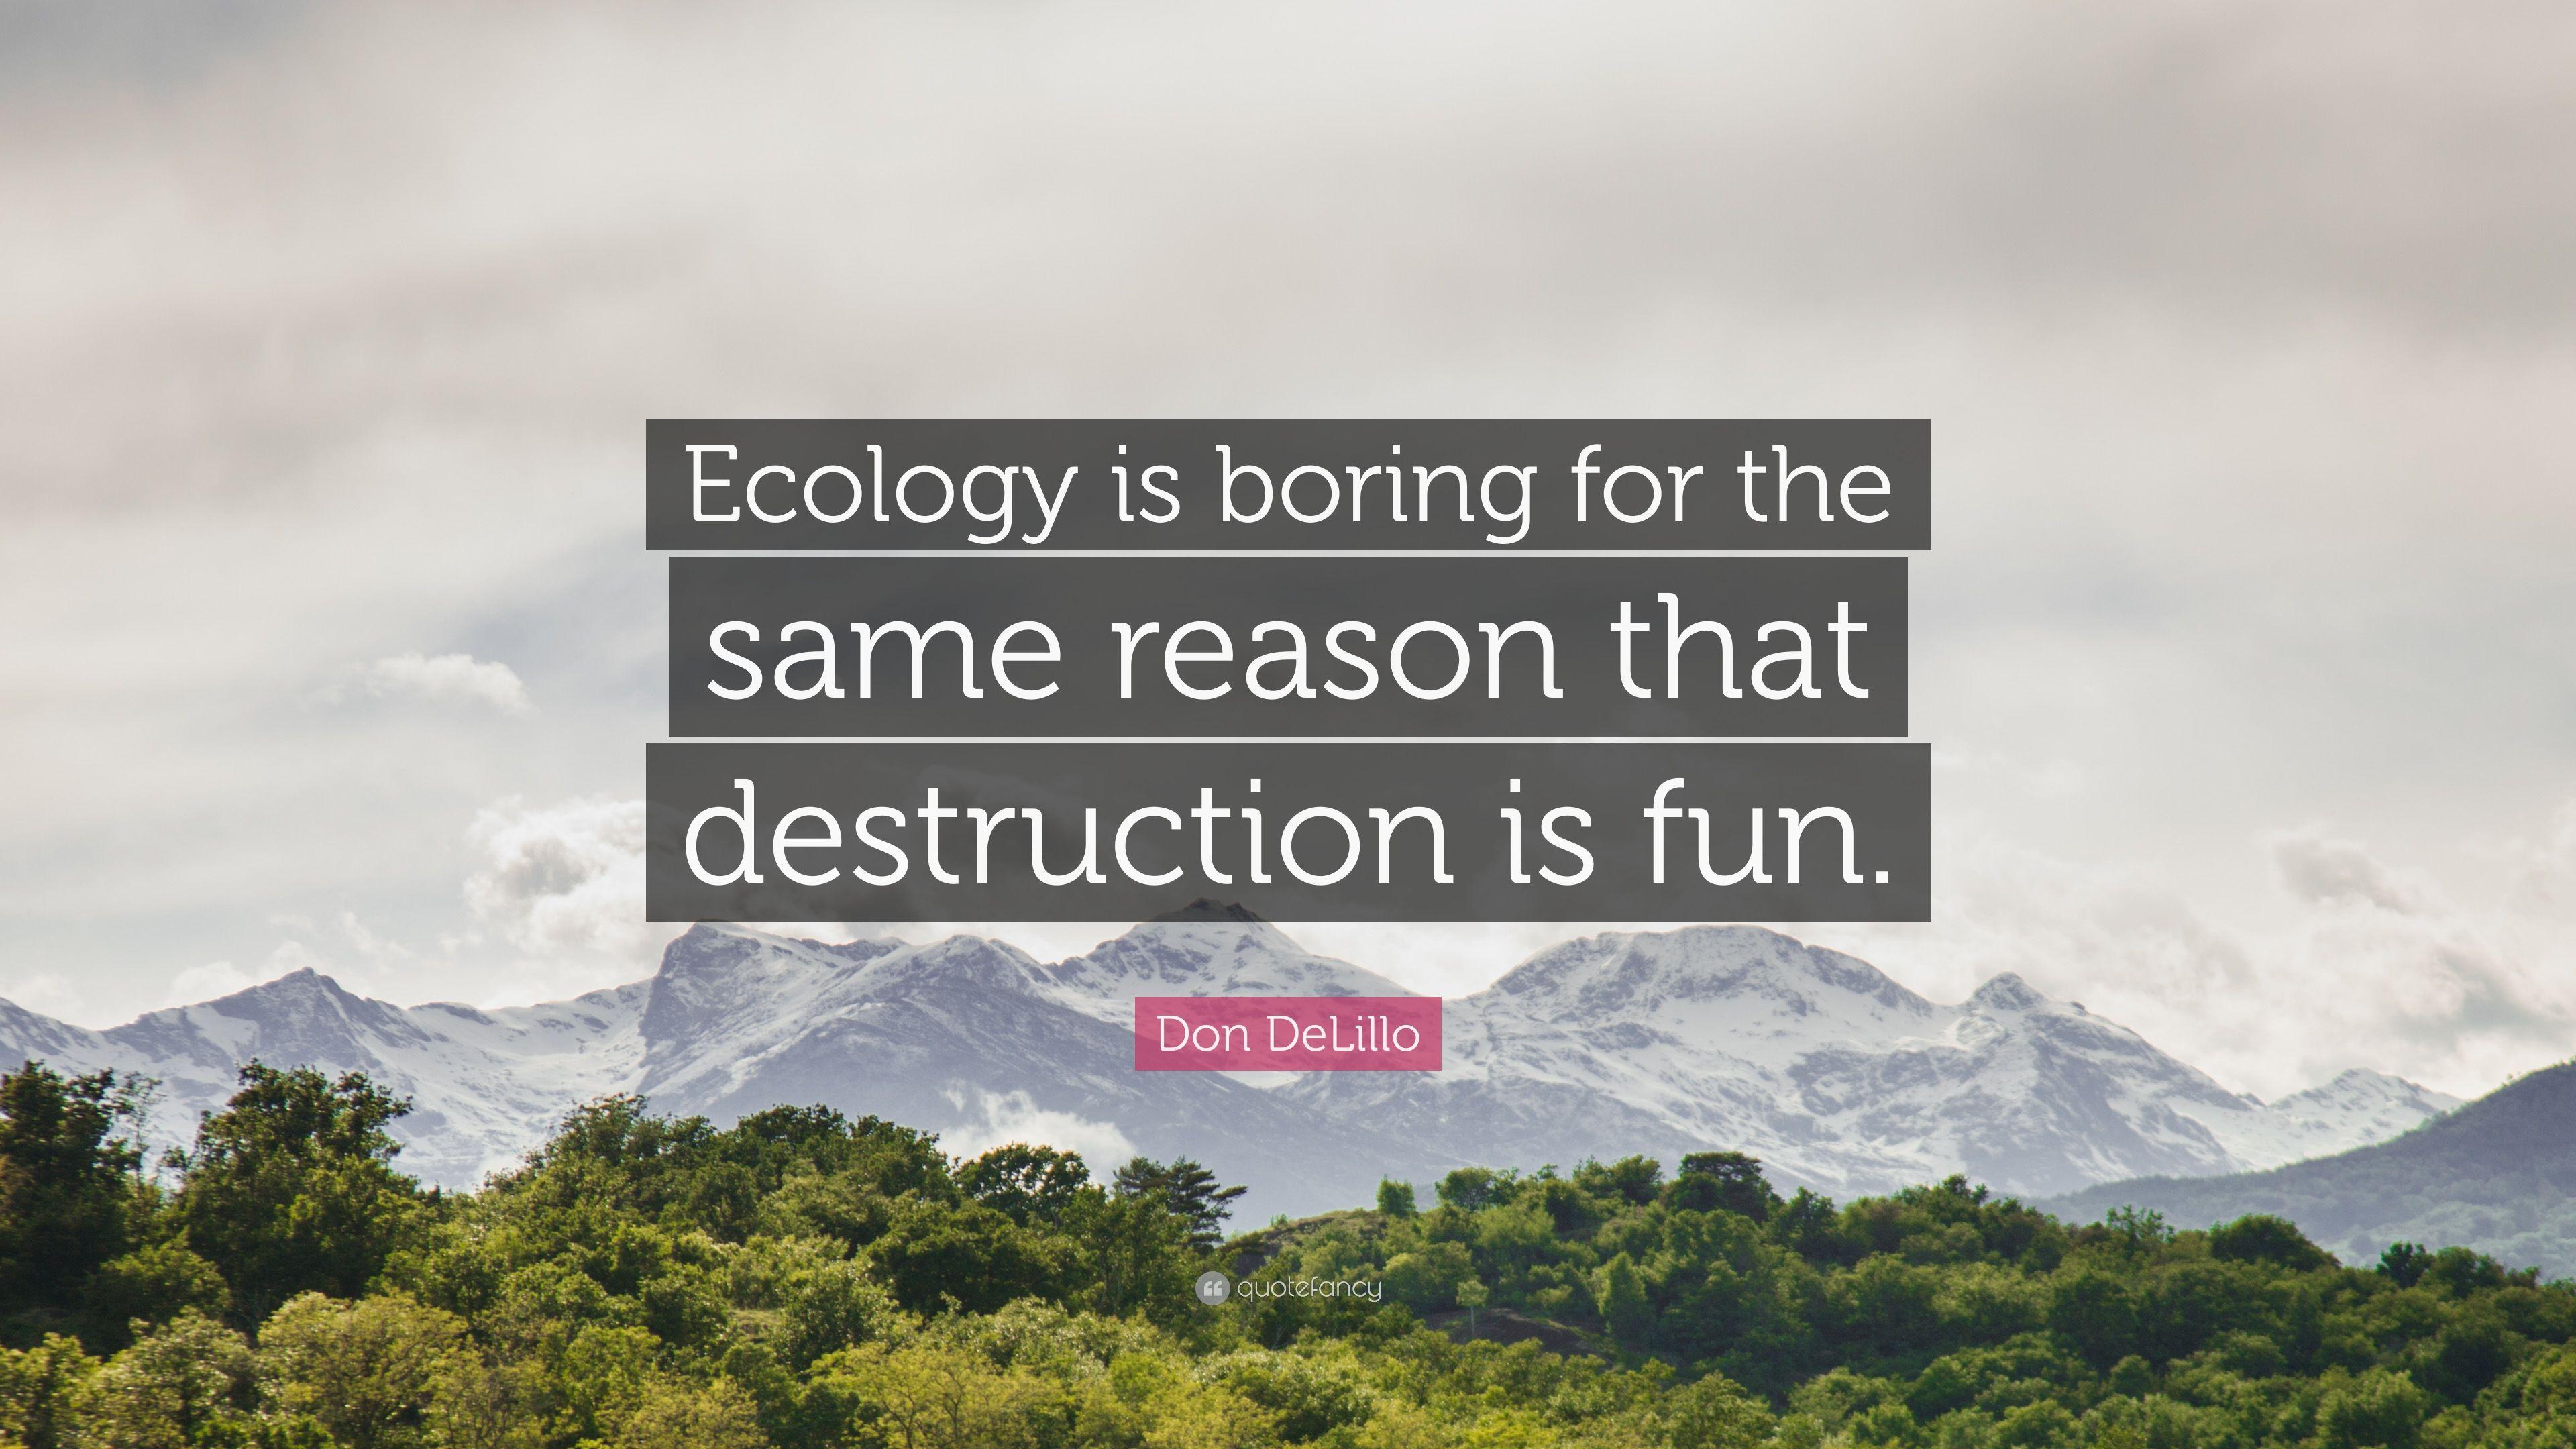 Don DeLillo Quote: “Ecology is boring for the same reason that